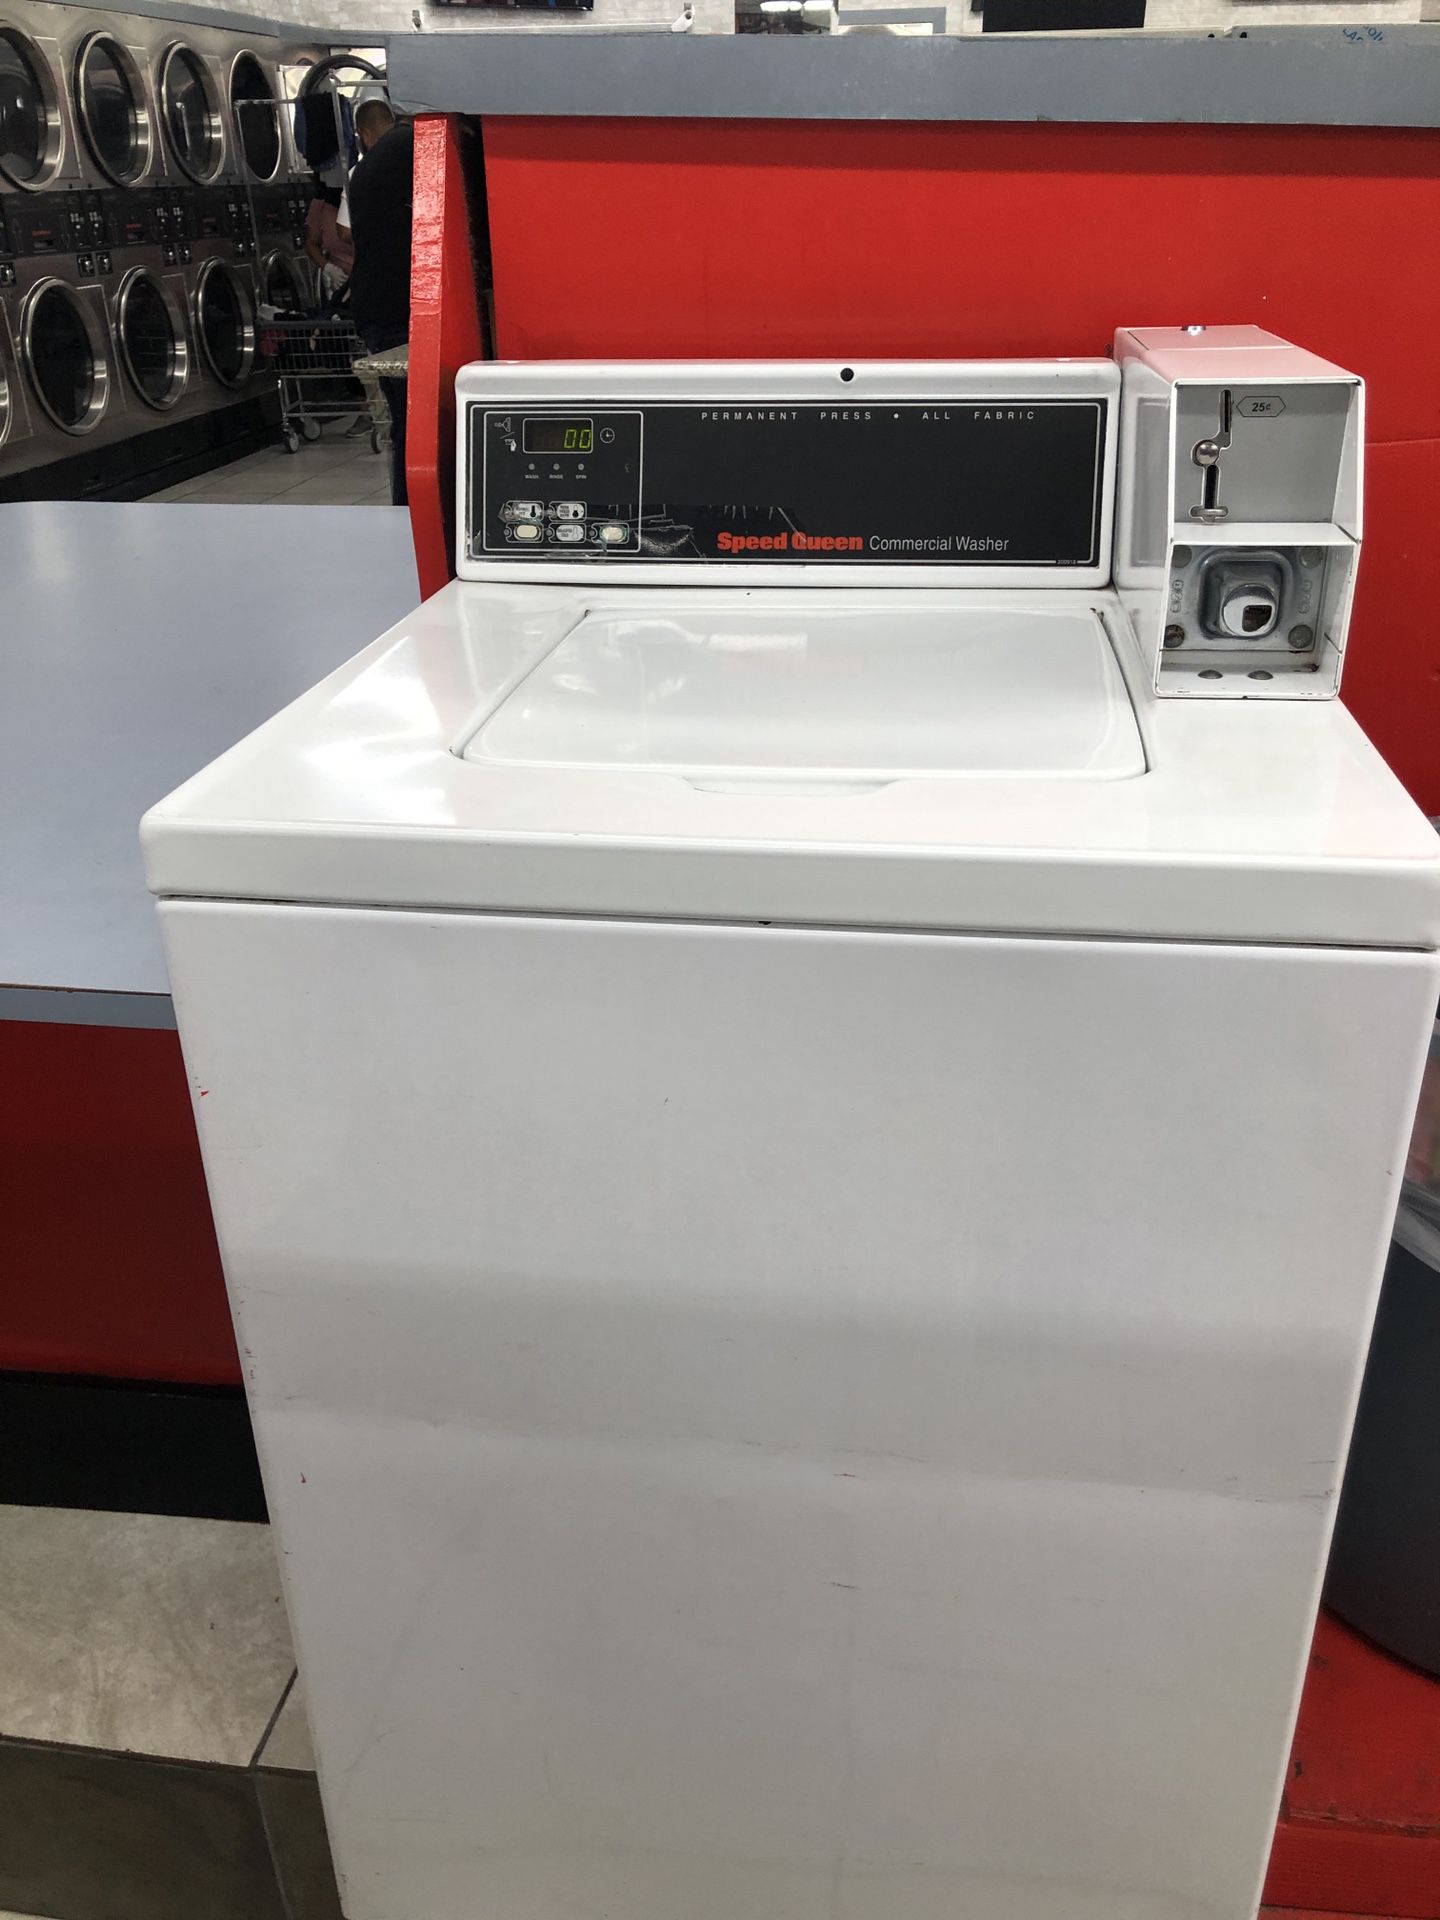 6 Commercial SPEED QUEEN washers